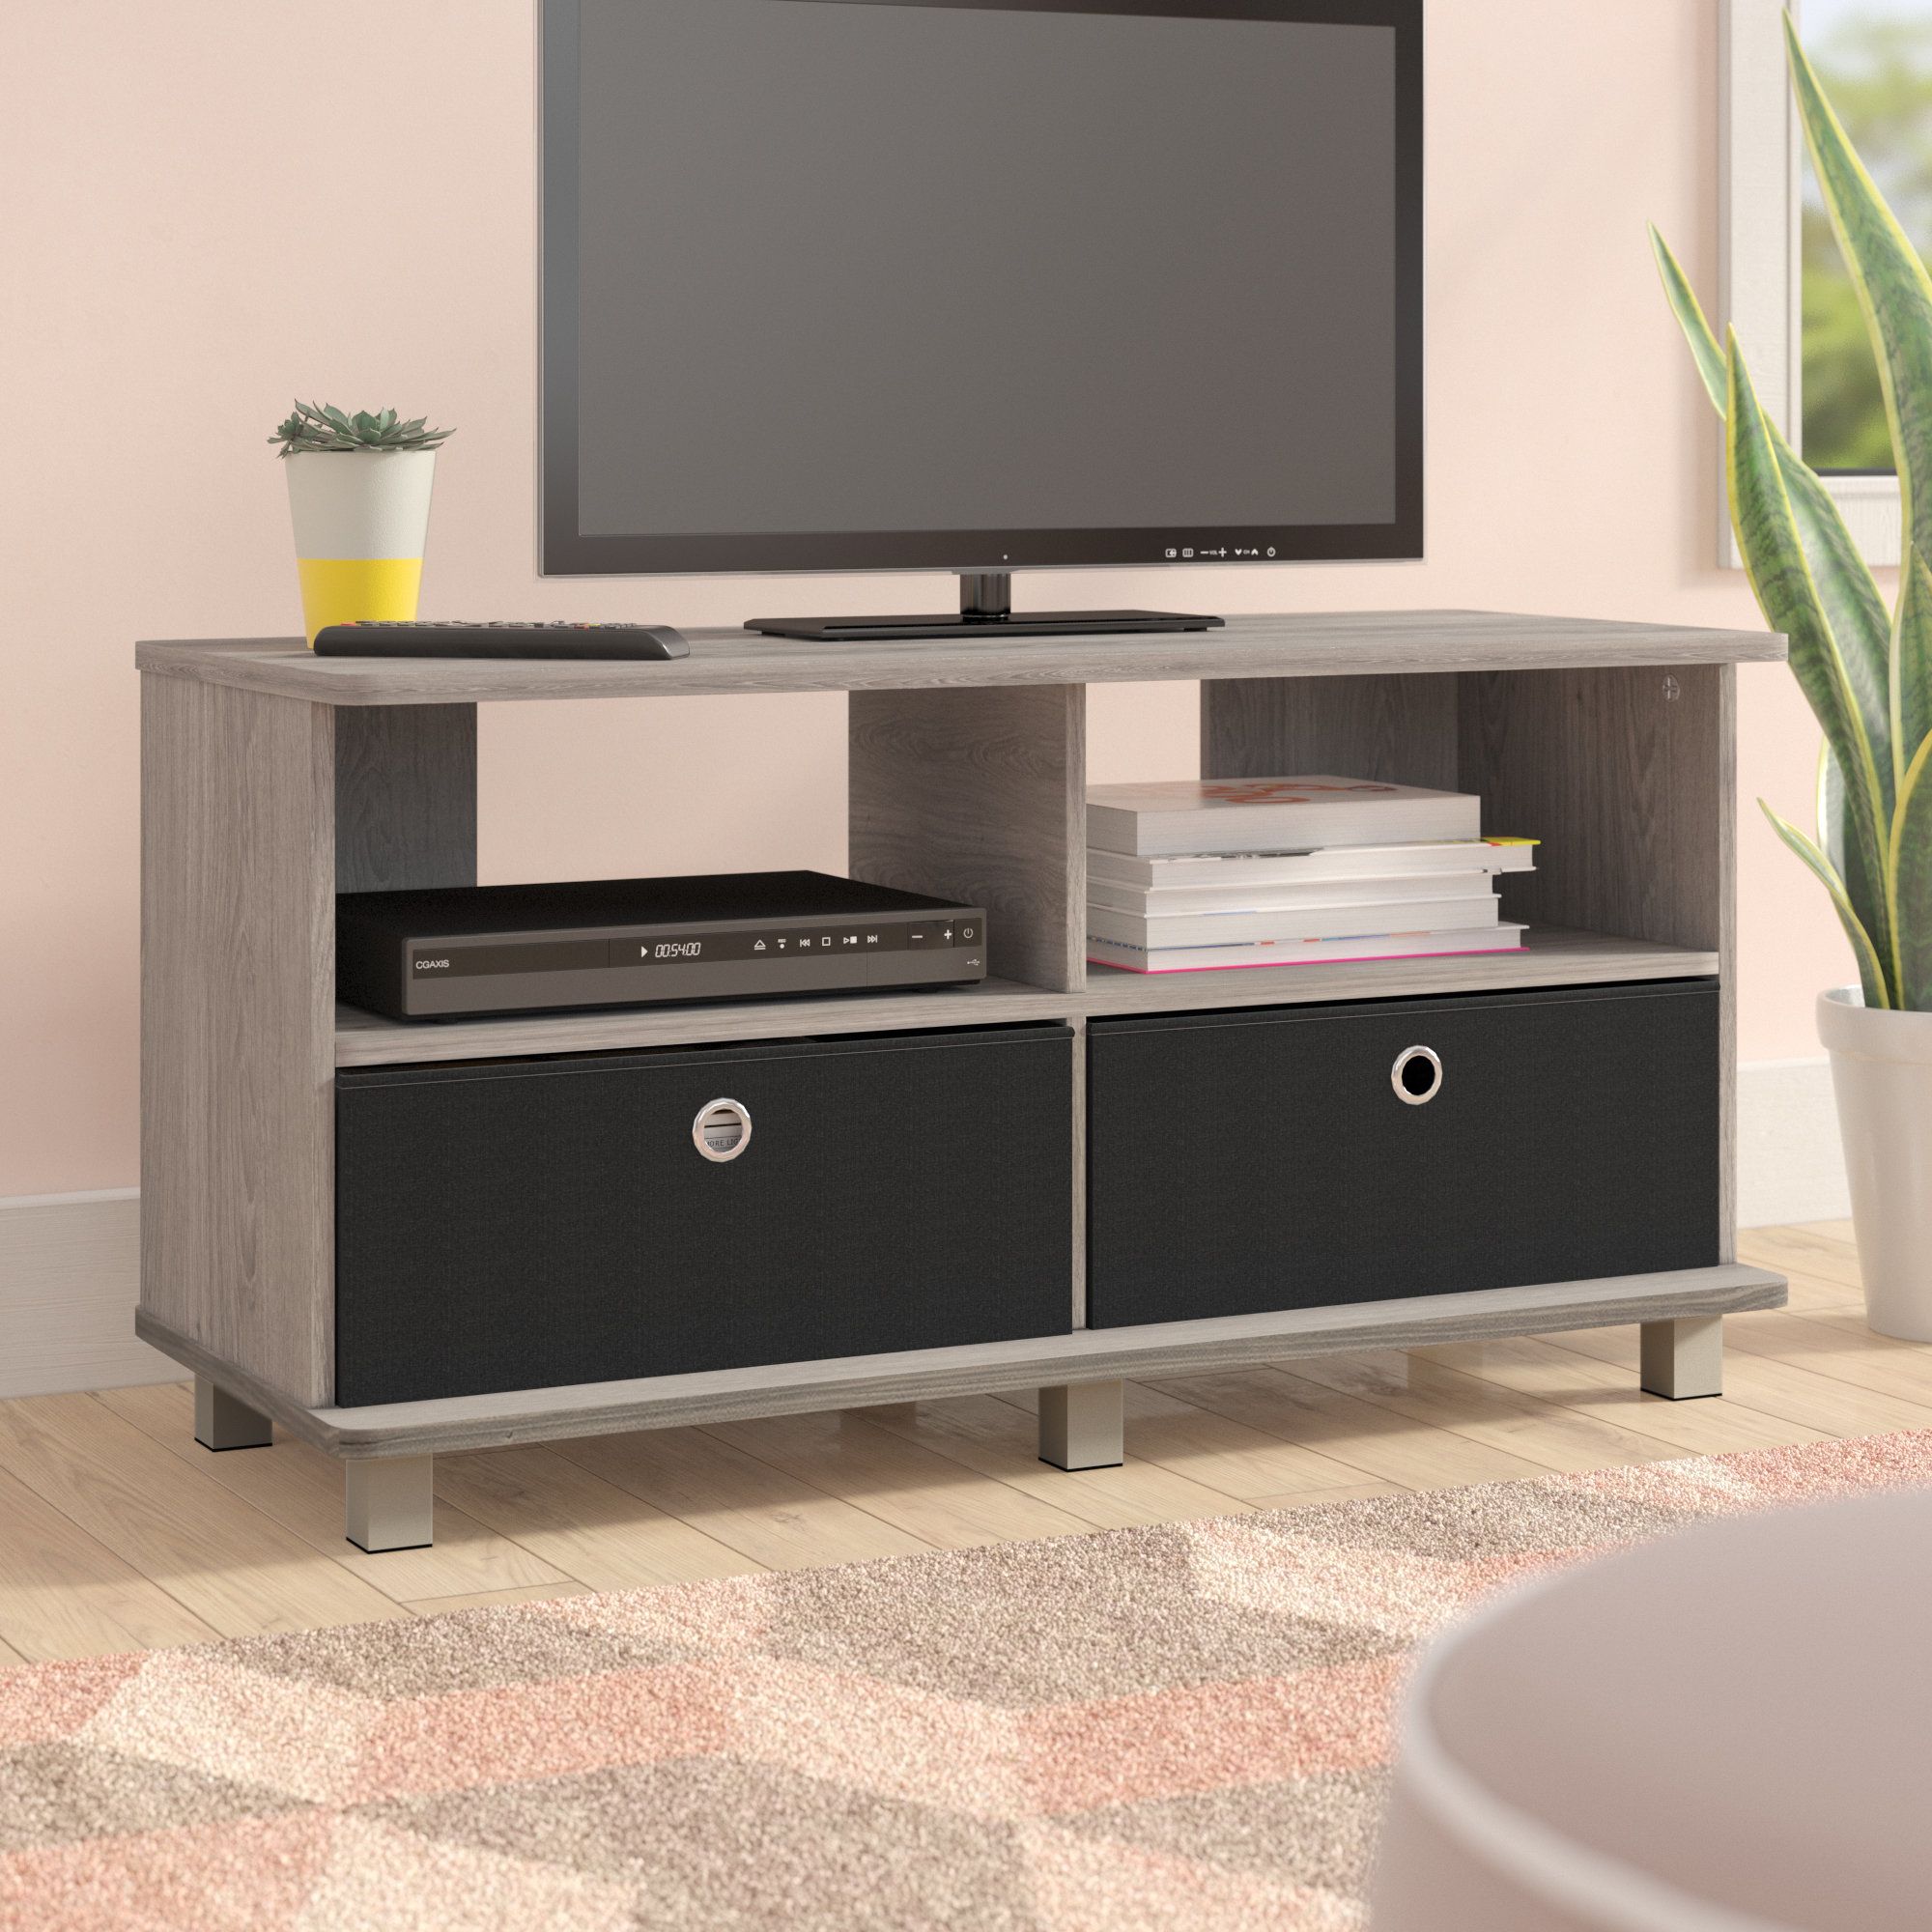 Ebern Designs Mariaella Tv Stand For Tvs Up To 40" & Reviews | Wayfair Pertaining To Willa 80 Inch Tv Stands (View 13 of 30)